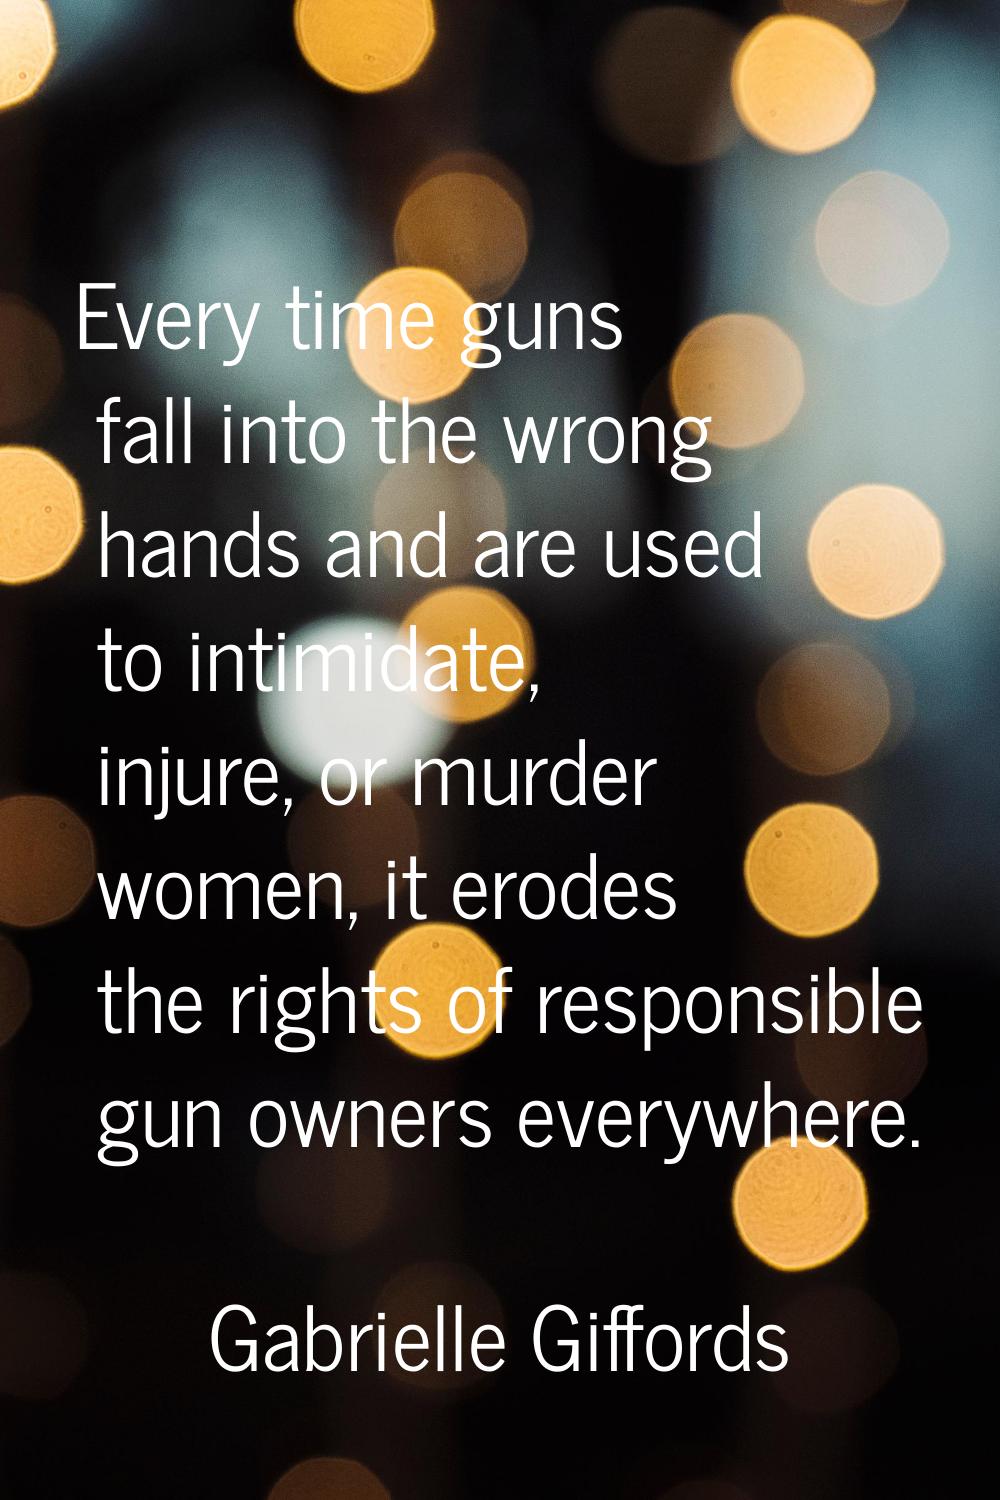 Every time guns fall into the wrong hands and are used to intimidate, injure, or murder women, it e